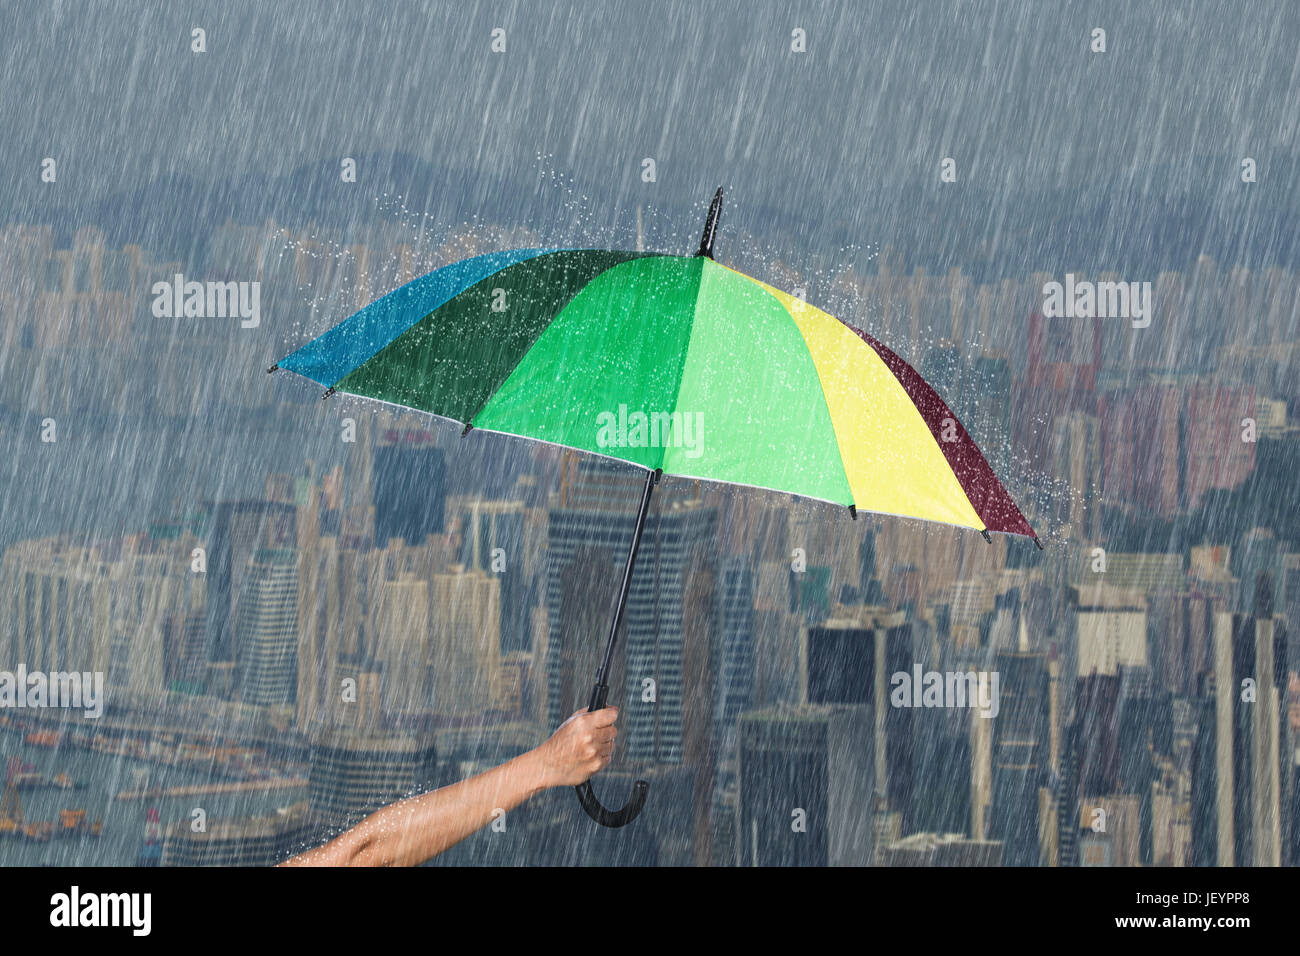 hand holding multicolored umbrella with falling rain at Hond Kong city background Stock Photo